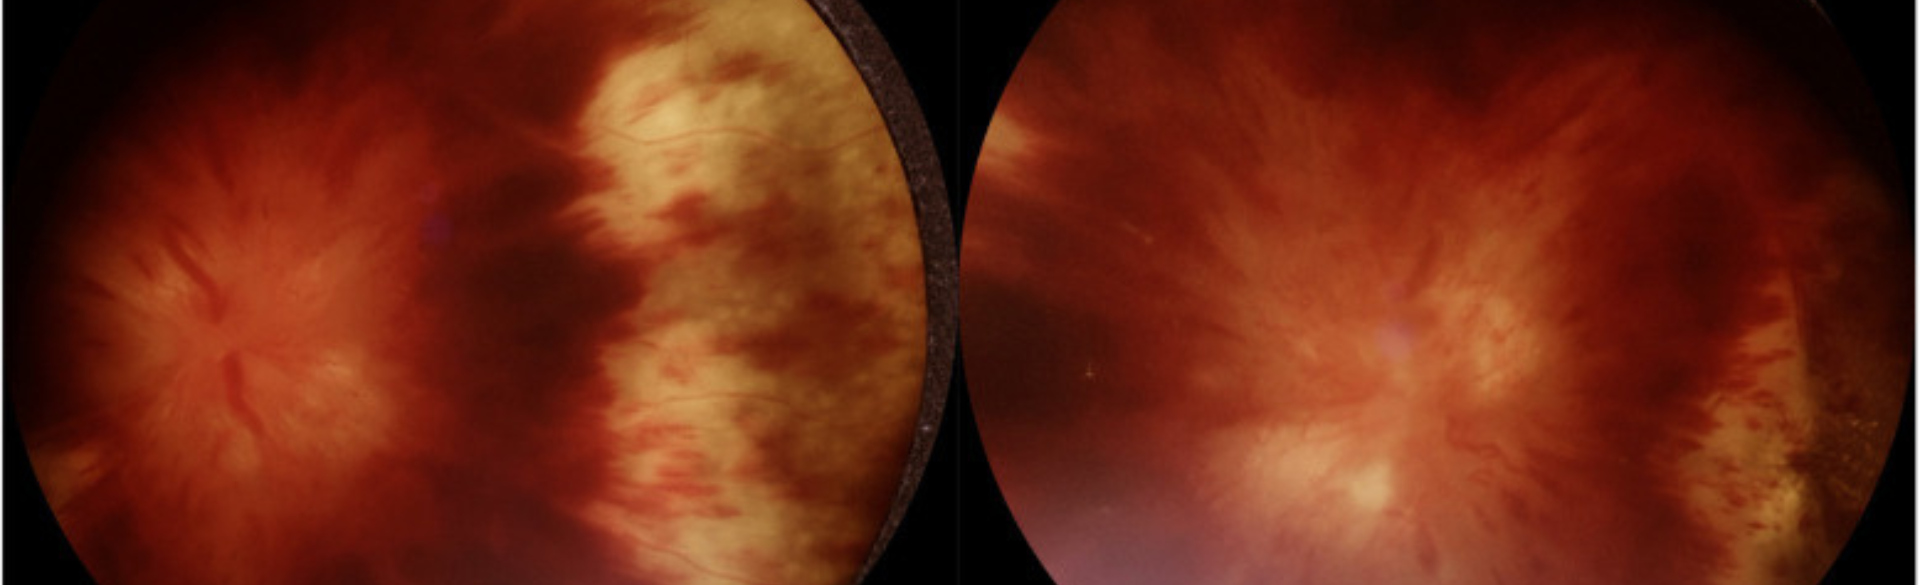 Employing Portable Fundus Photography Cameras to Enhance On-Call Imaging